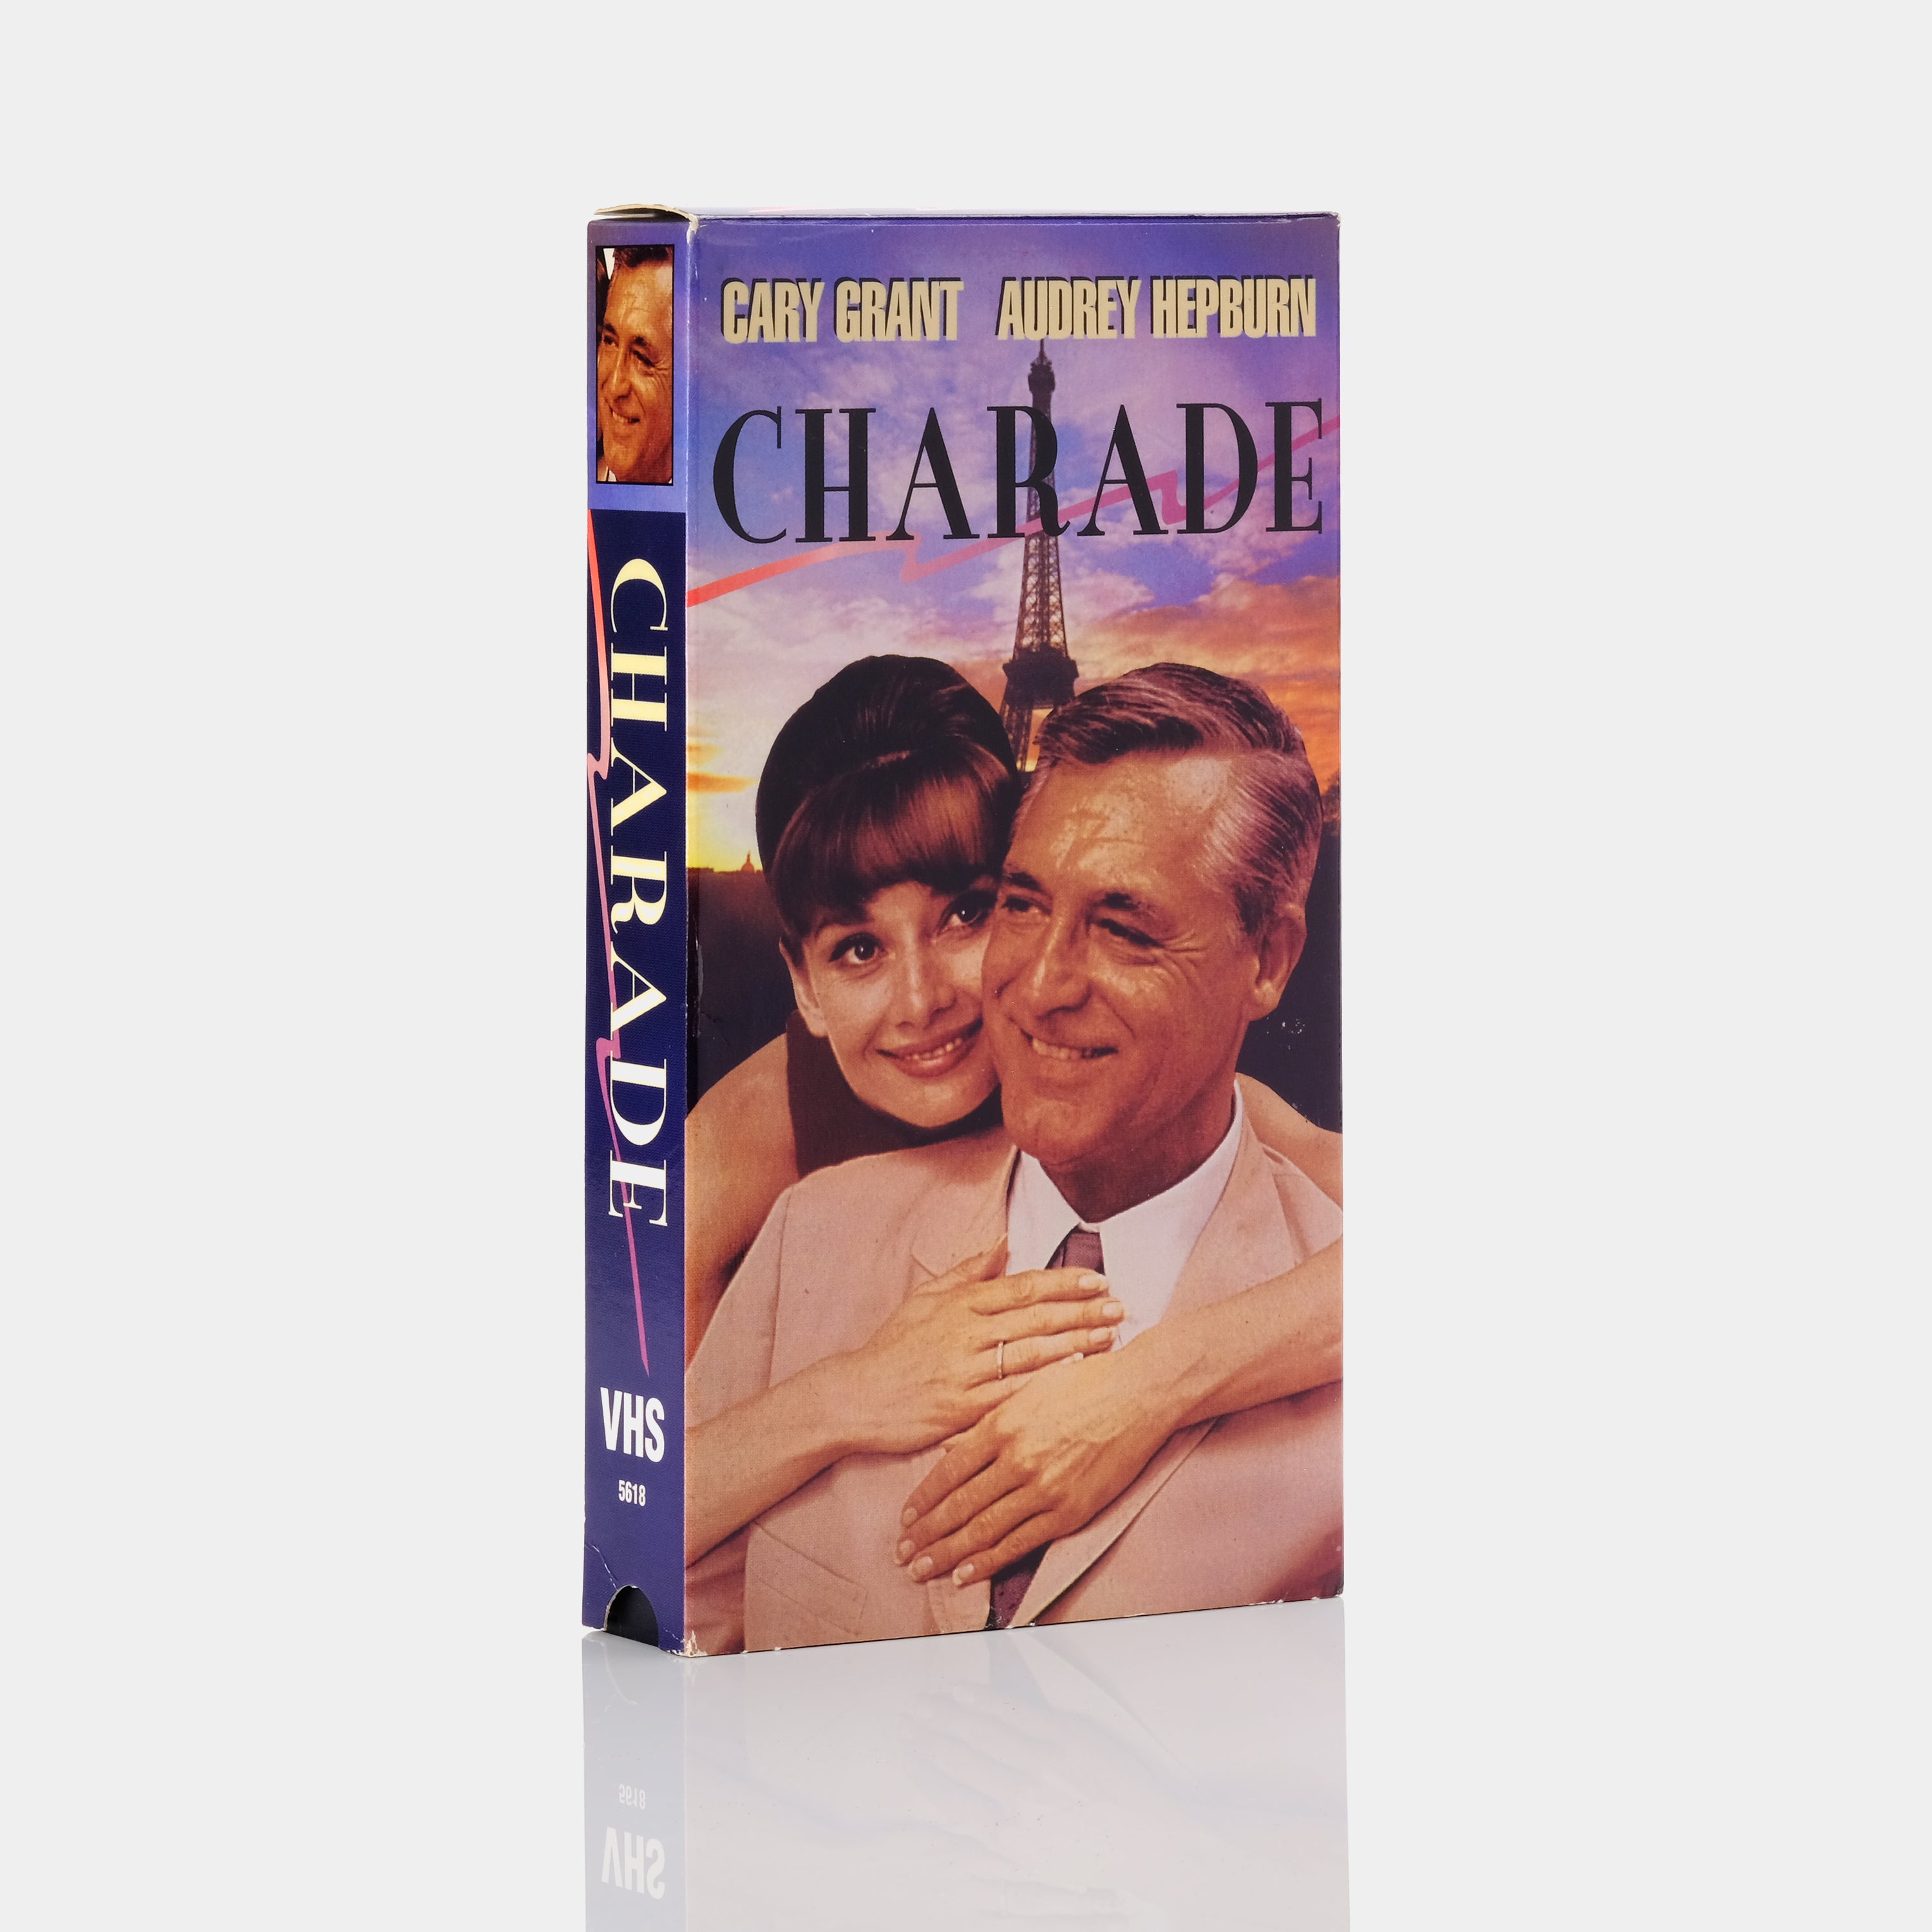 Charade VHS Tape